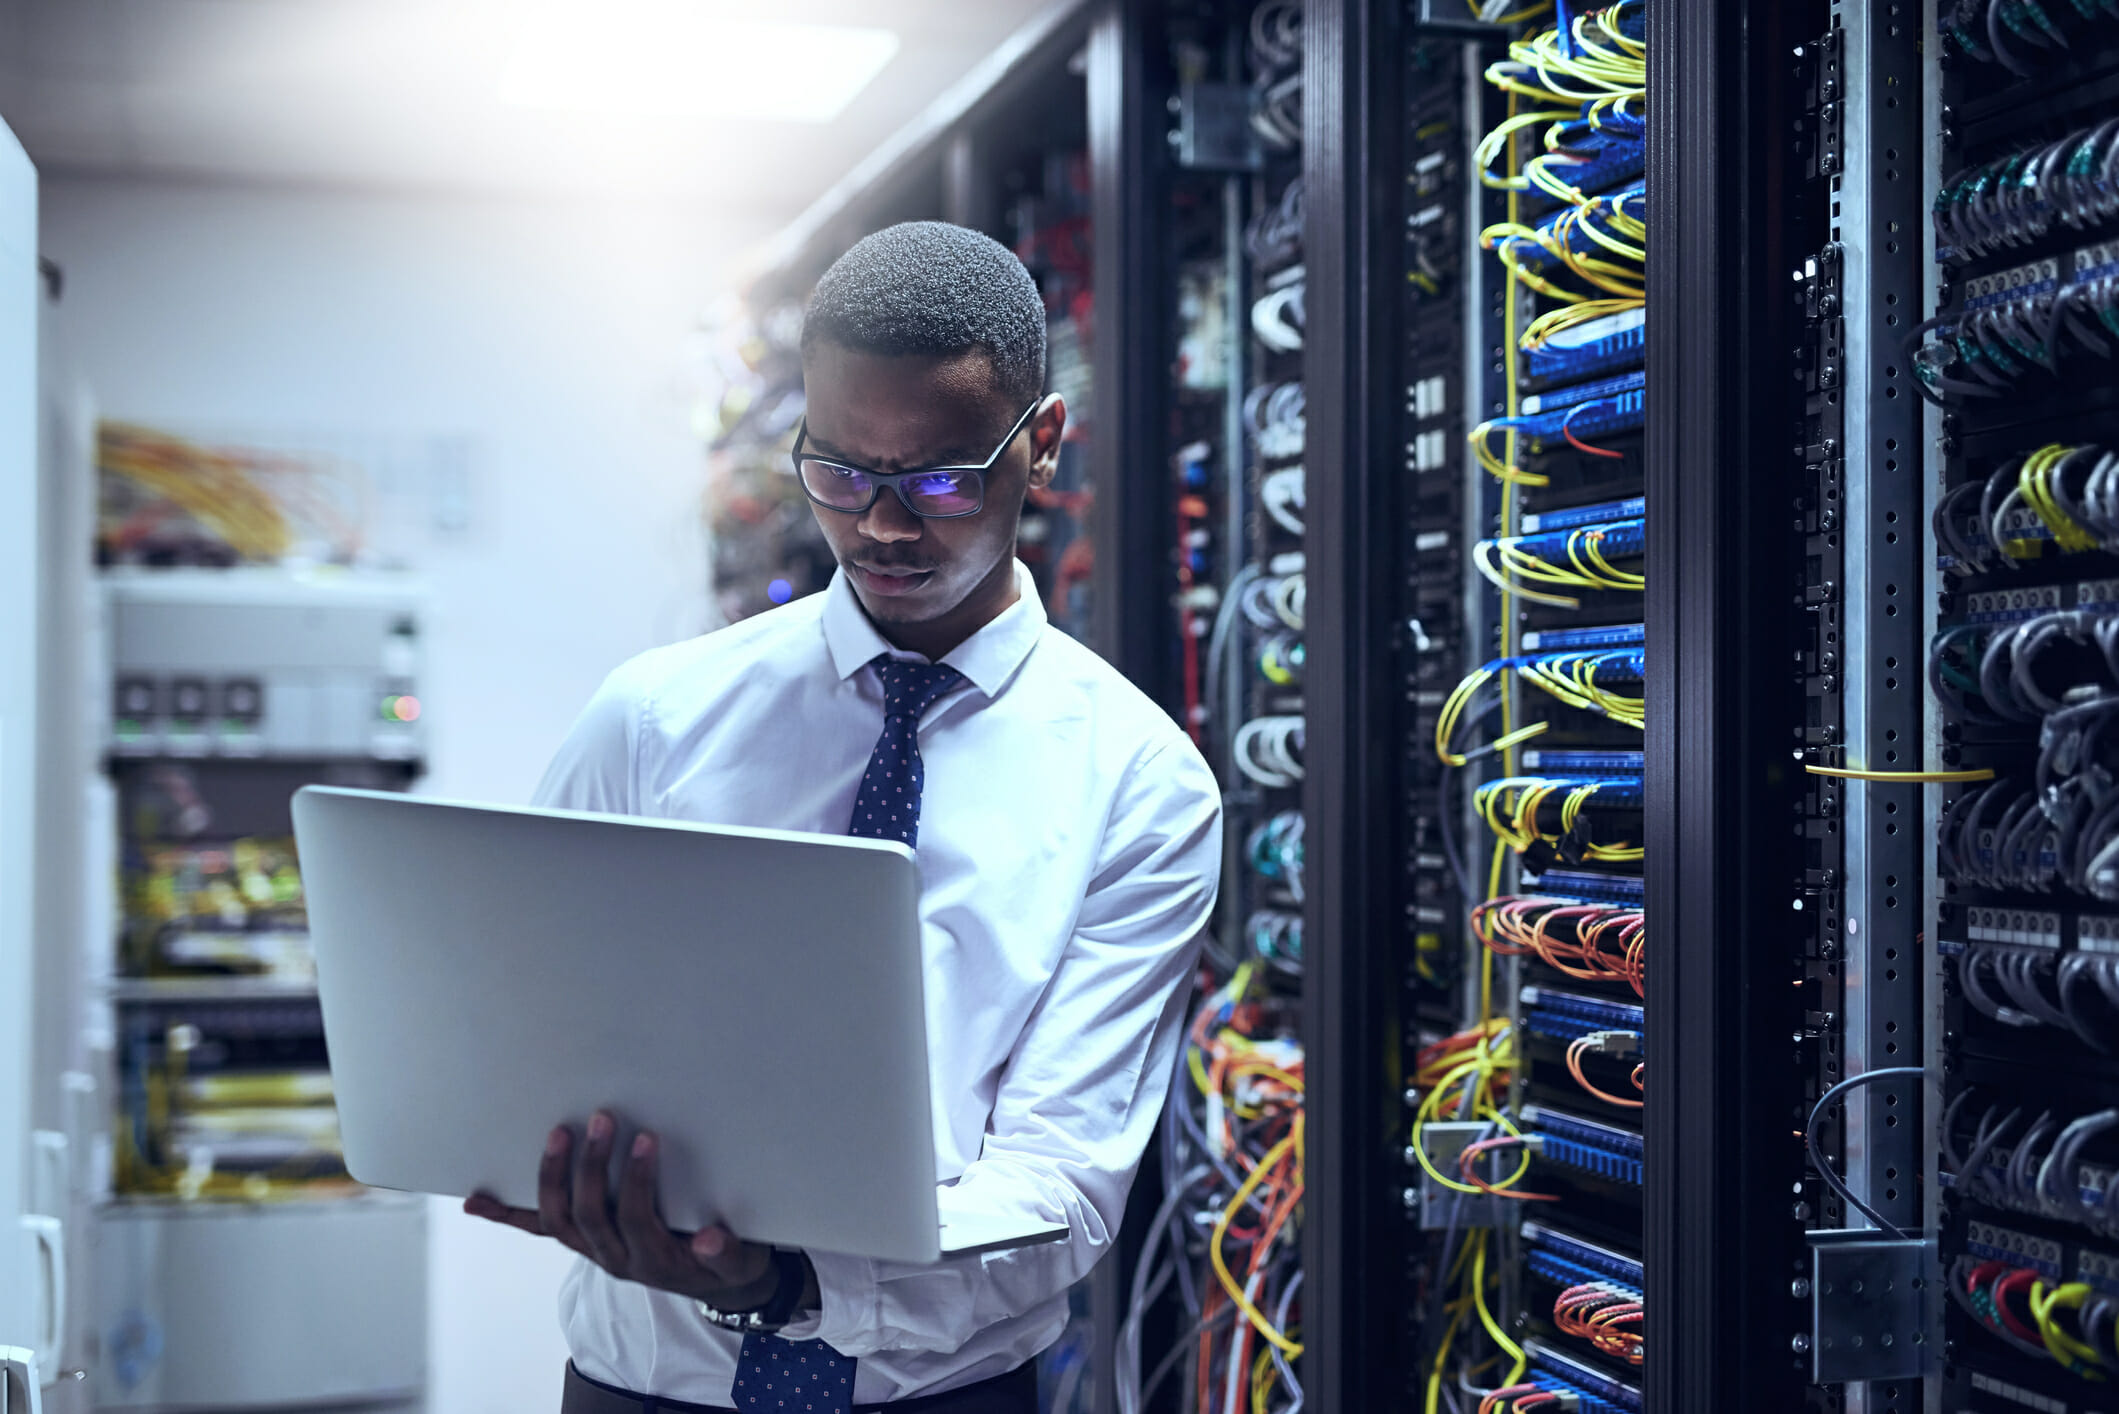 Young man works on a computer in server room